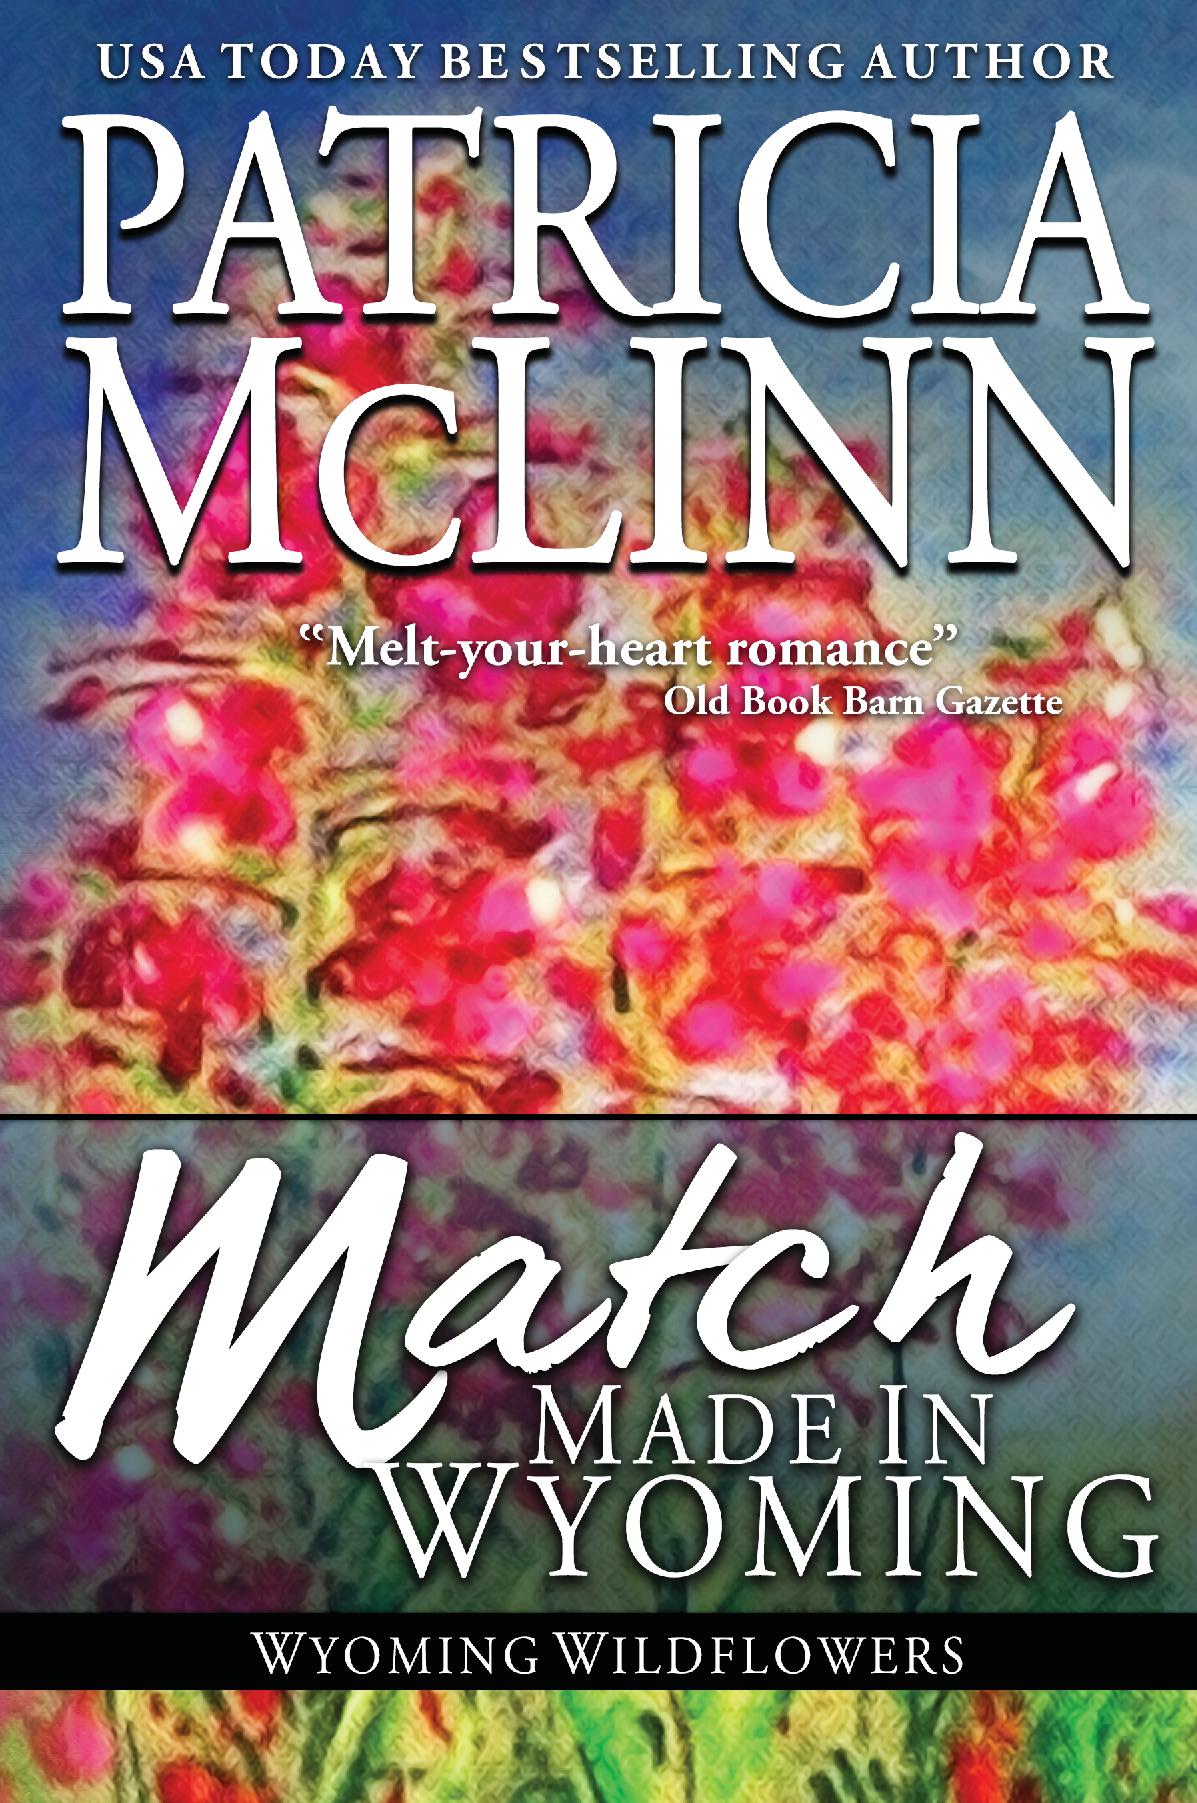 Match Made in Wyoming - Patricia McLinn